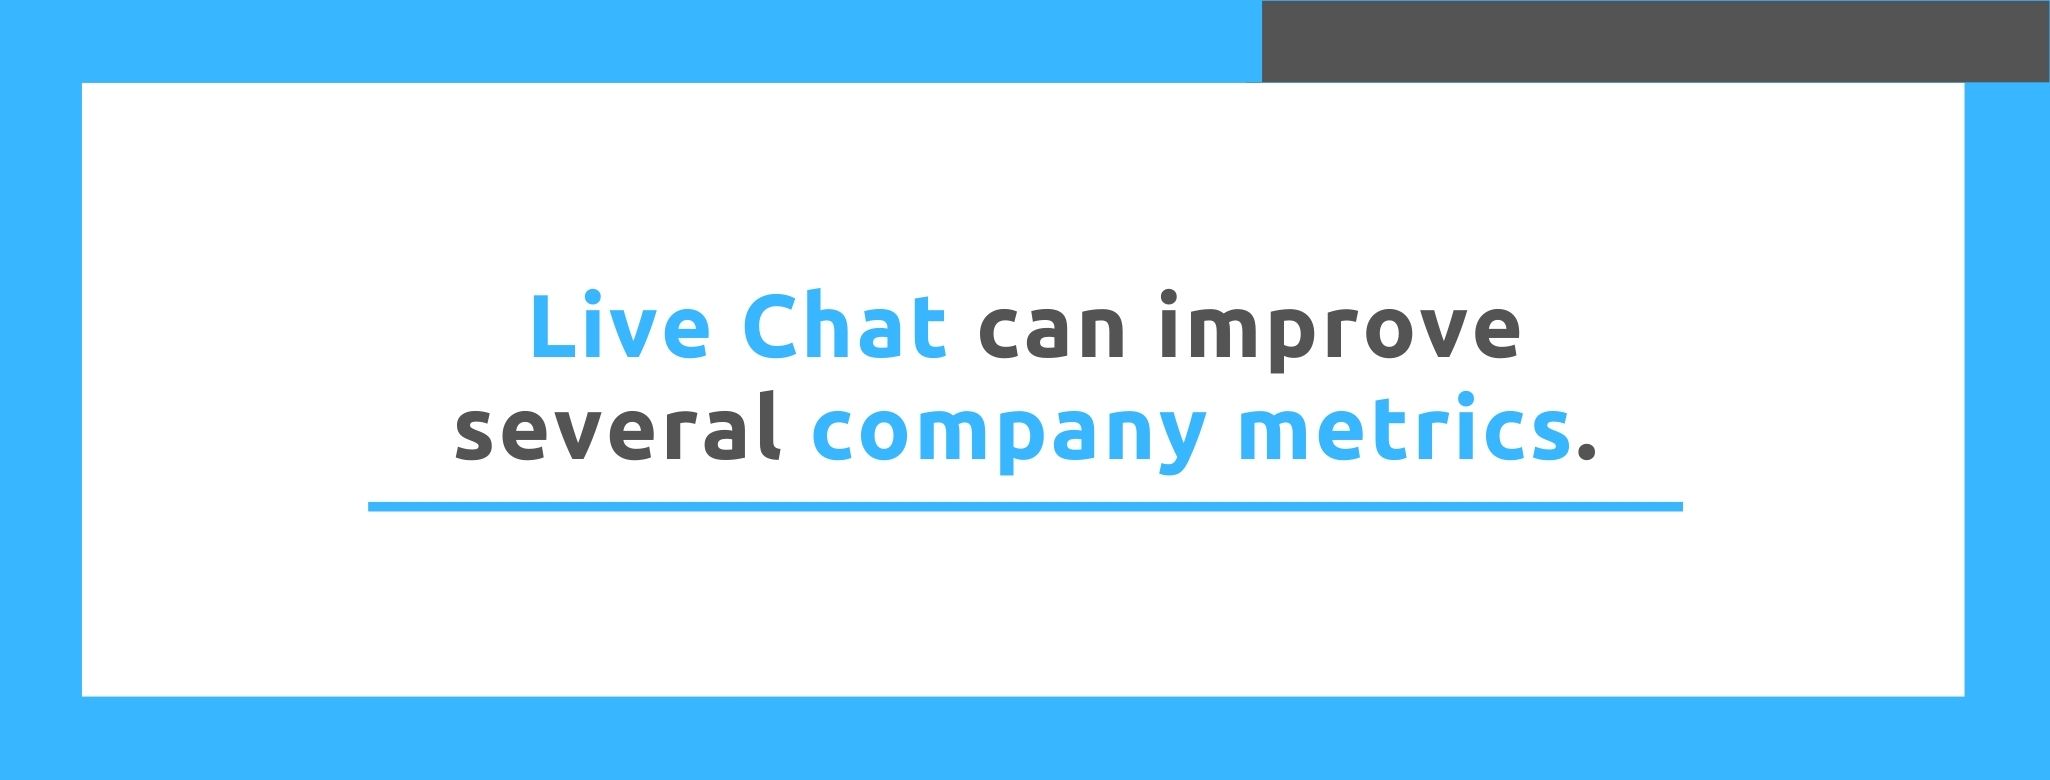 Live Chat can improve several company metrics. - 22 Live Chat Statistics - Replyco